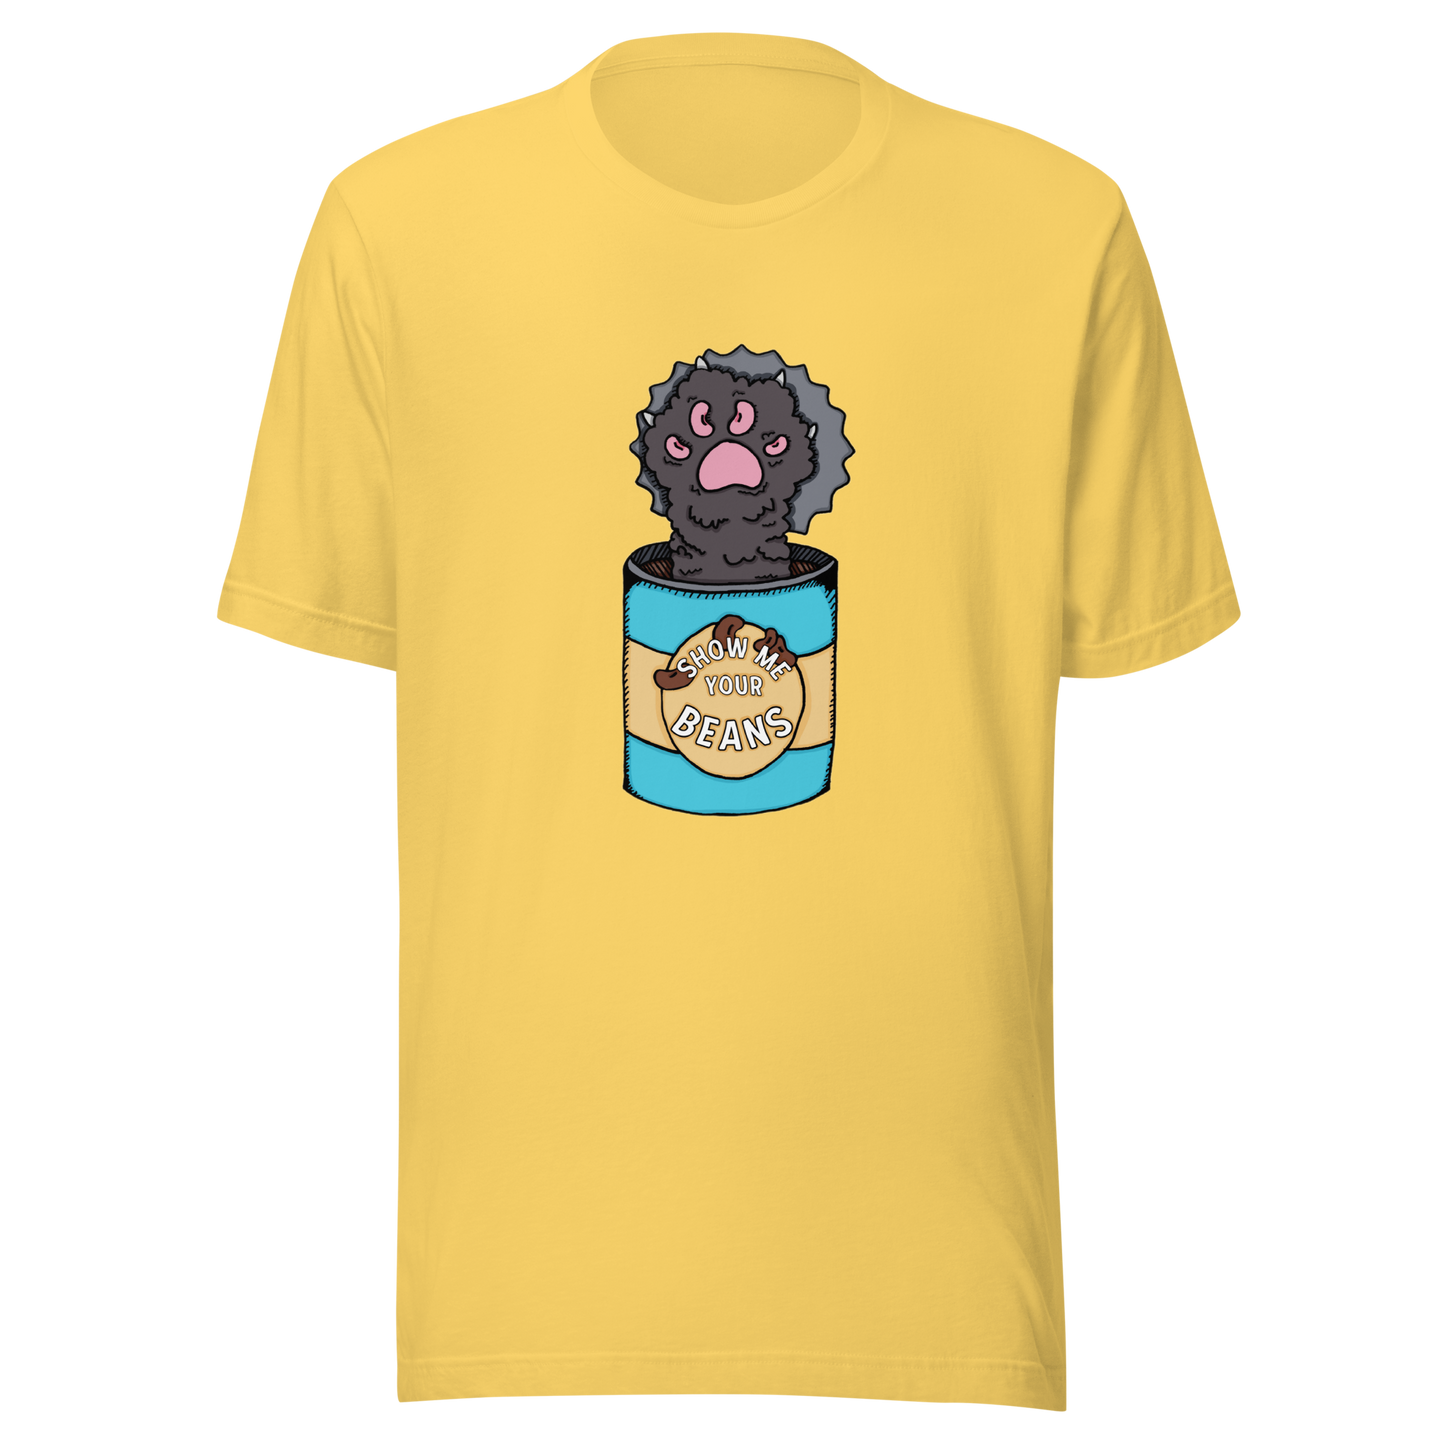 show me your beans t-shirt in yellow - gaslit apparel